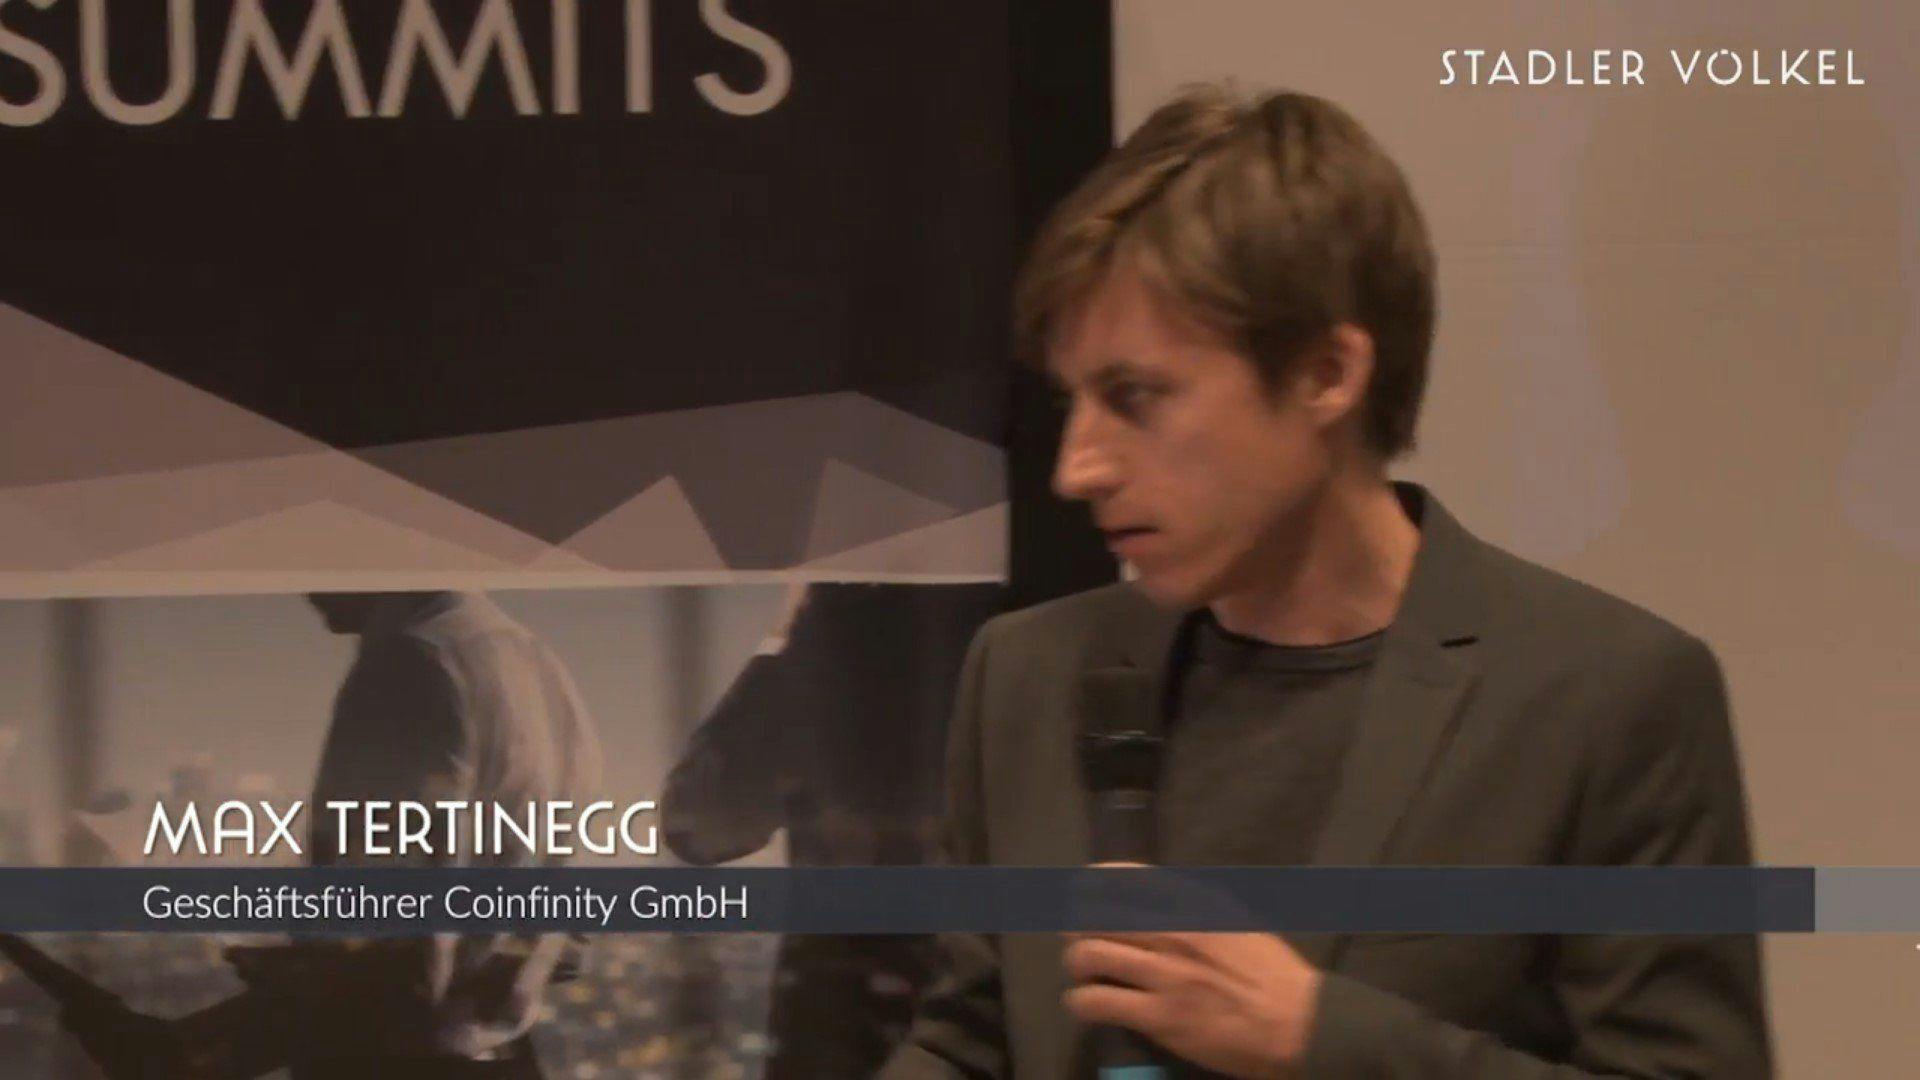 Max Tertinegg on the use of virtual currencies for trading